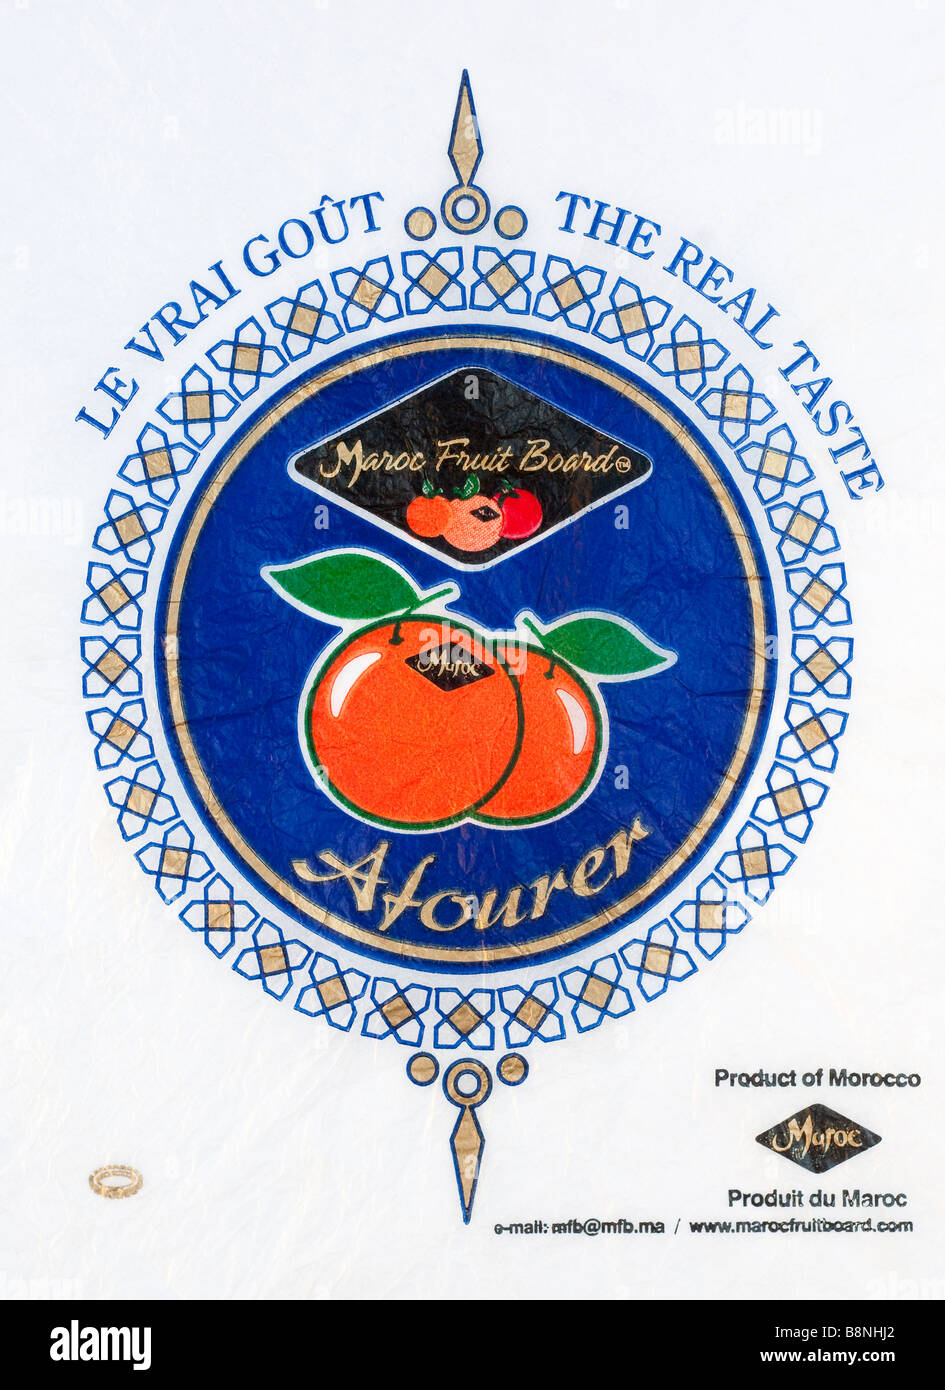 Citrus fruit wrapper from Morocco - Oranges illustration on tissue paper. Stock Photo